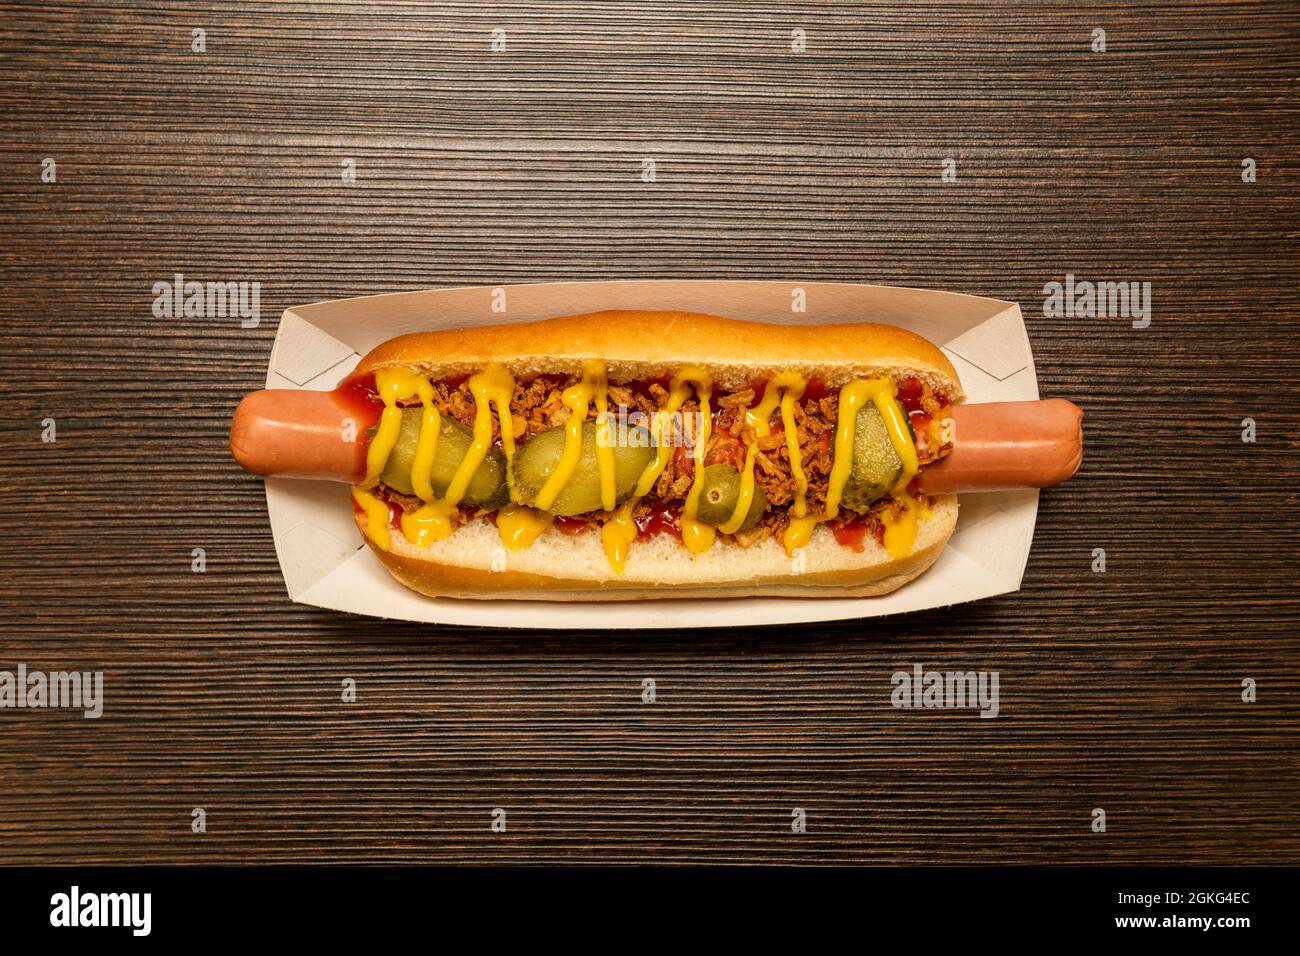 top view image of hot dog with pickles, cooked sausage, ketchup, mustard and crispy onion on cardboard tray Stock Photo